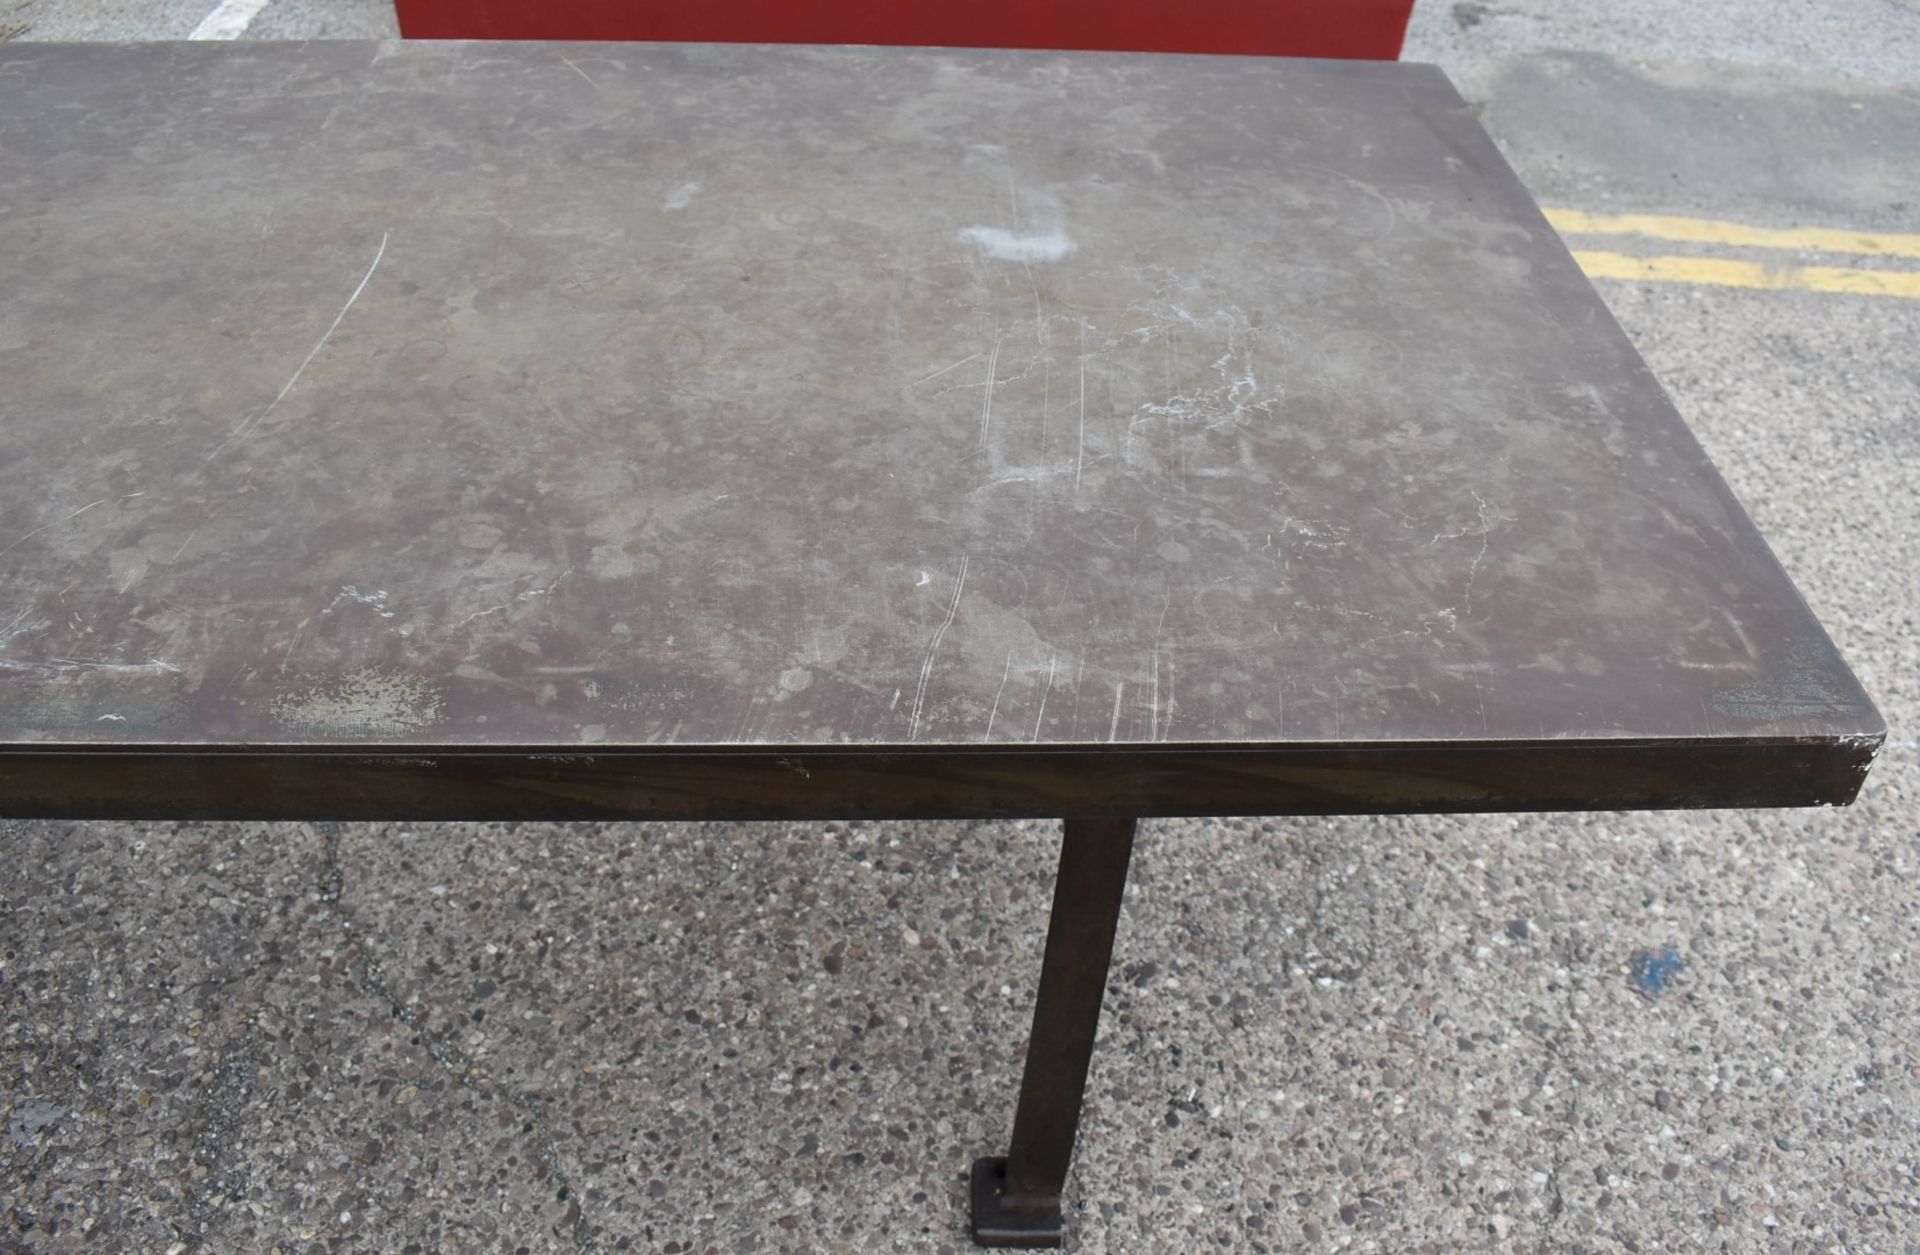 1 x Industrial Style 200cm Banquetting Restaurant Table Featuring a Heavy Steel Top & Steel Legs - Image 21 of 23